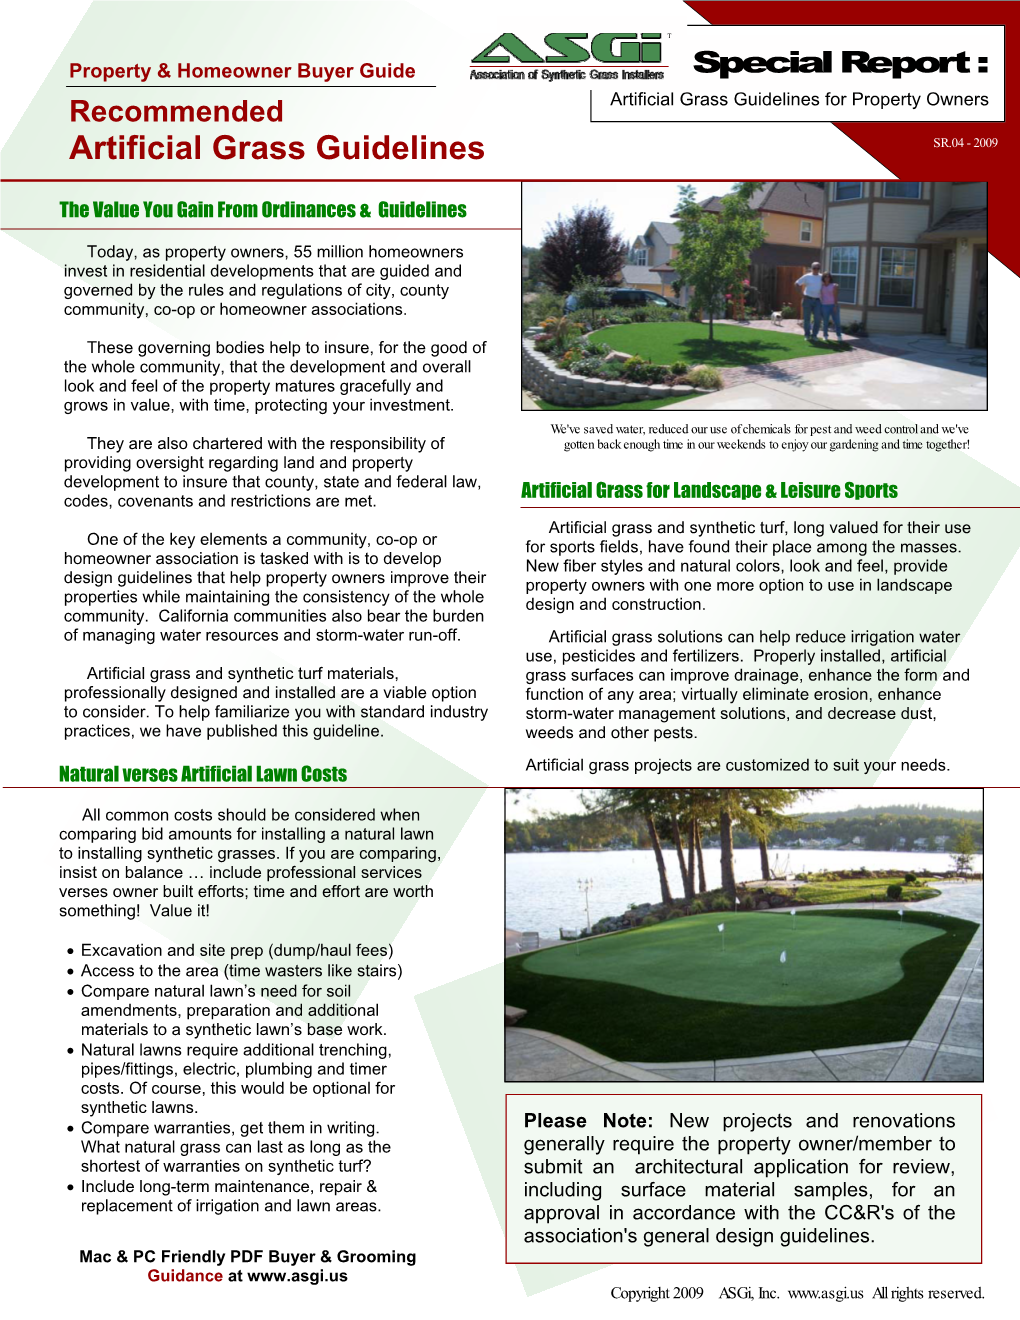 Artificial Grass Guidelines for Property Owners Artificial Grass Guidelines SR.04 - 2009